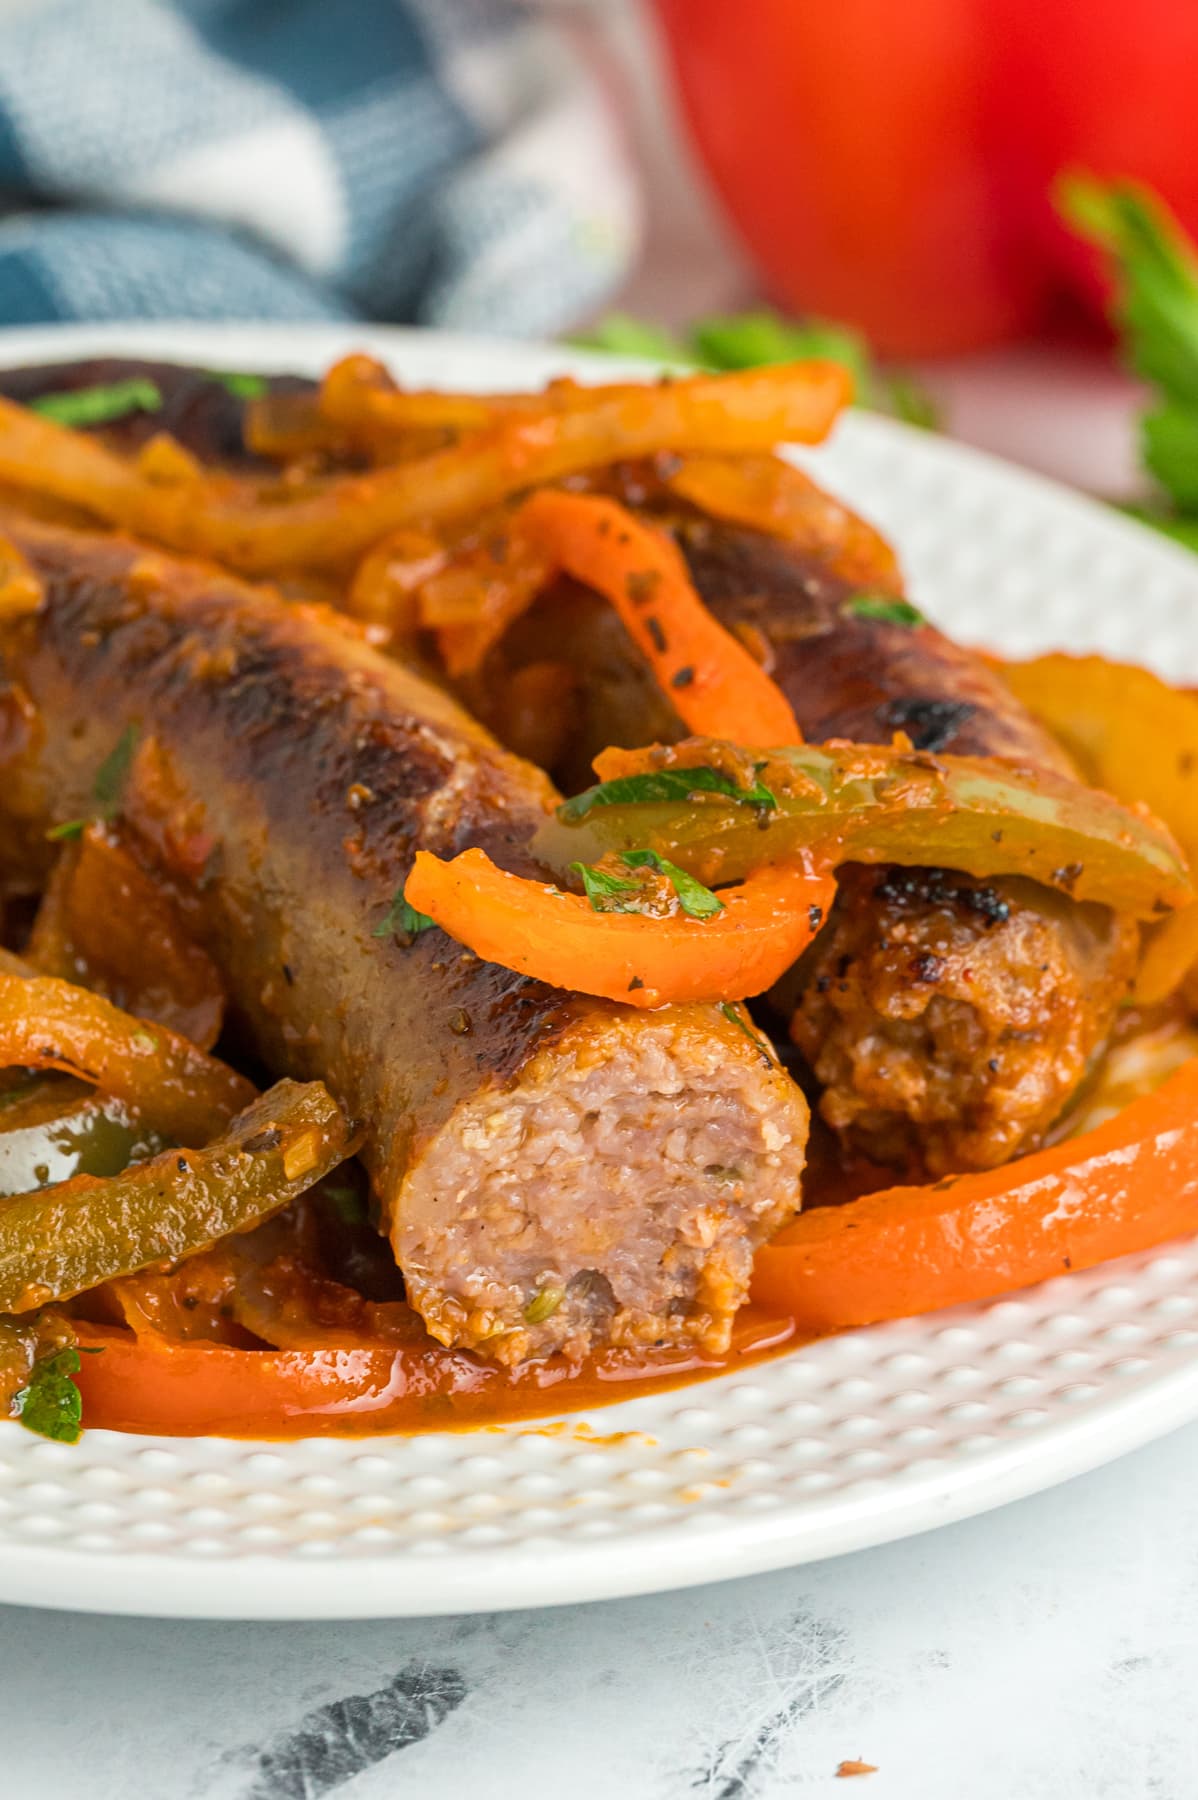 A plate of Italian sausage and peppers